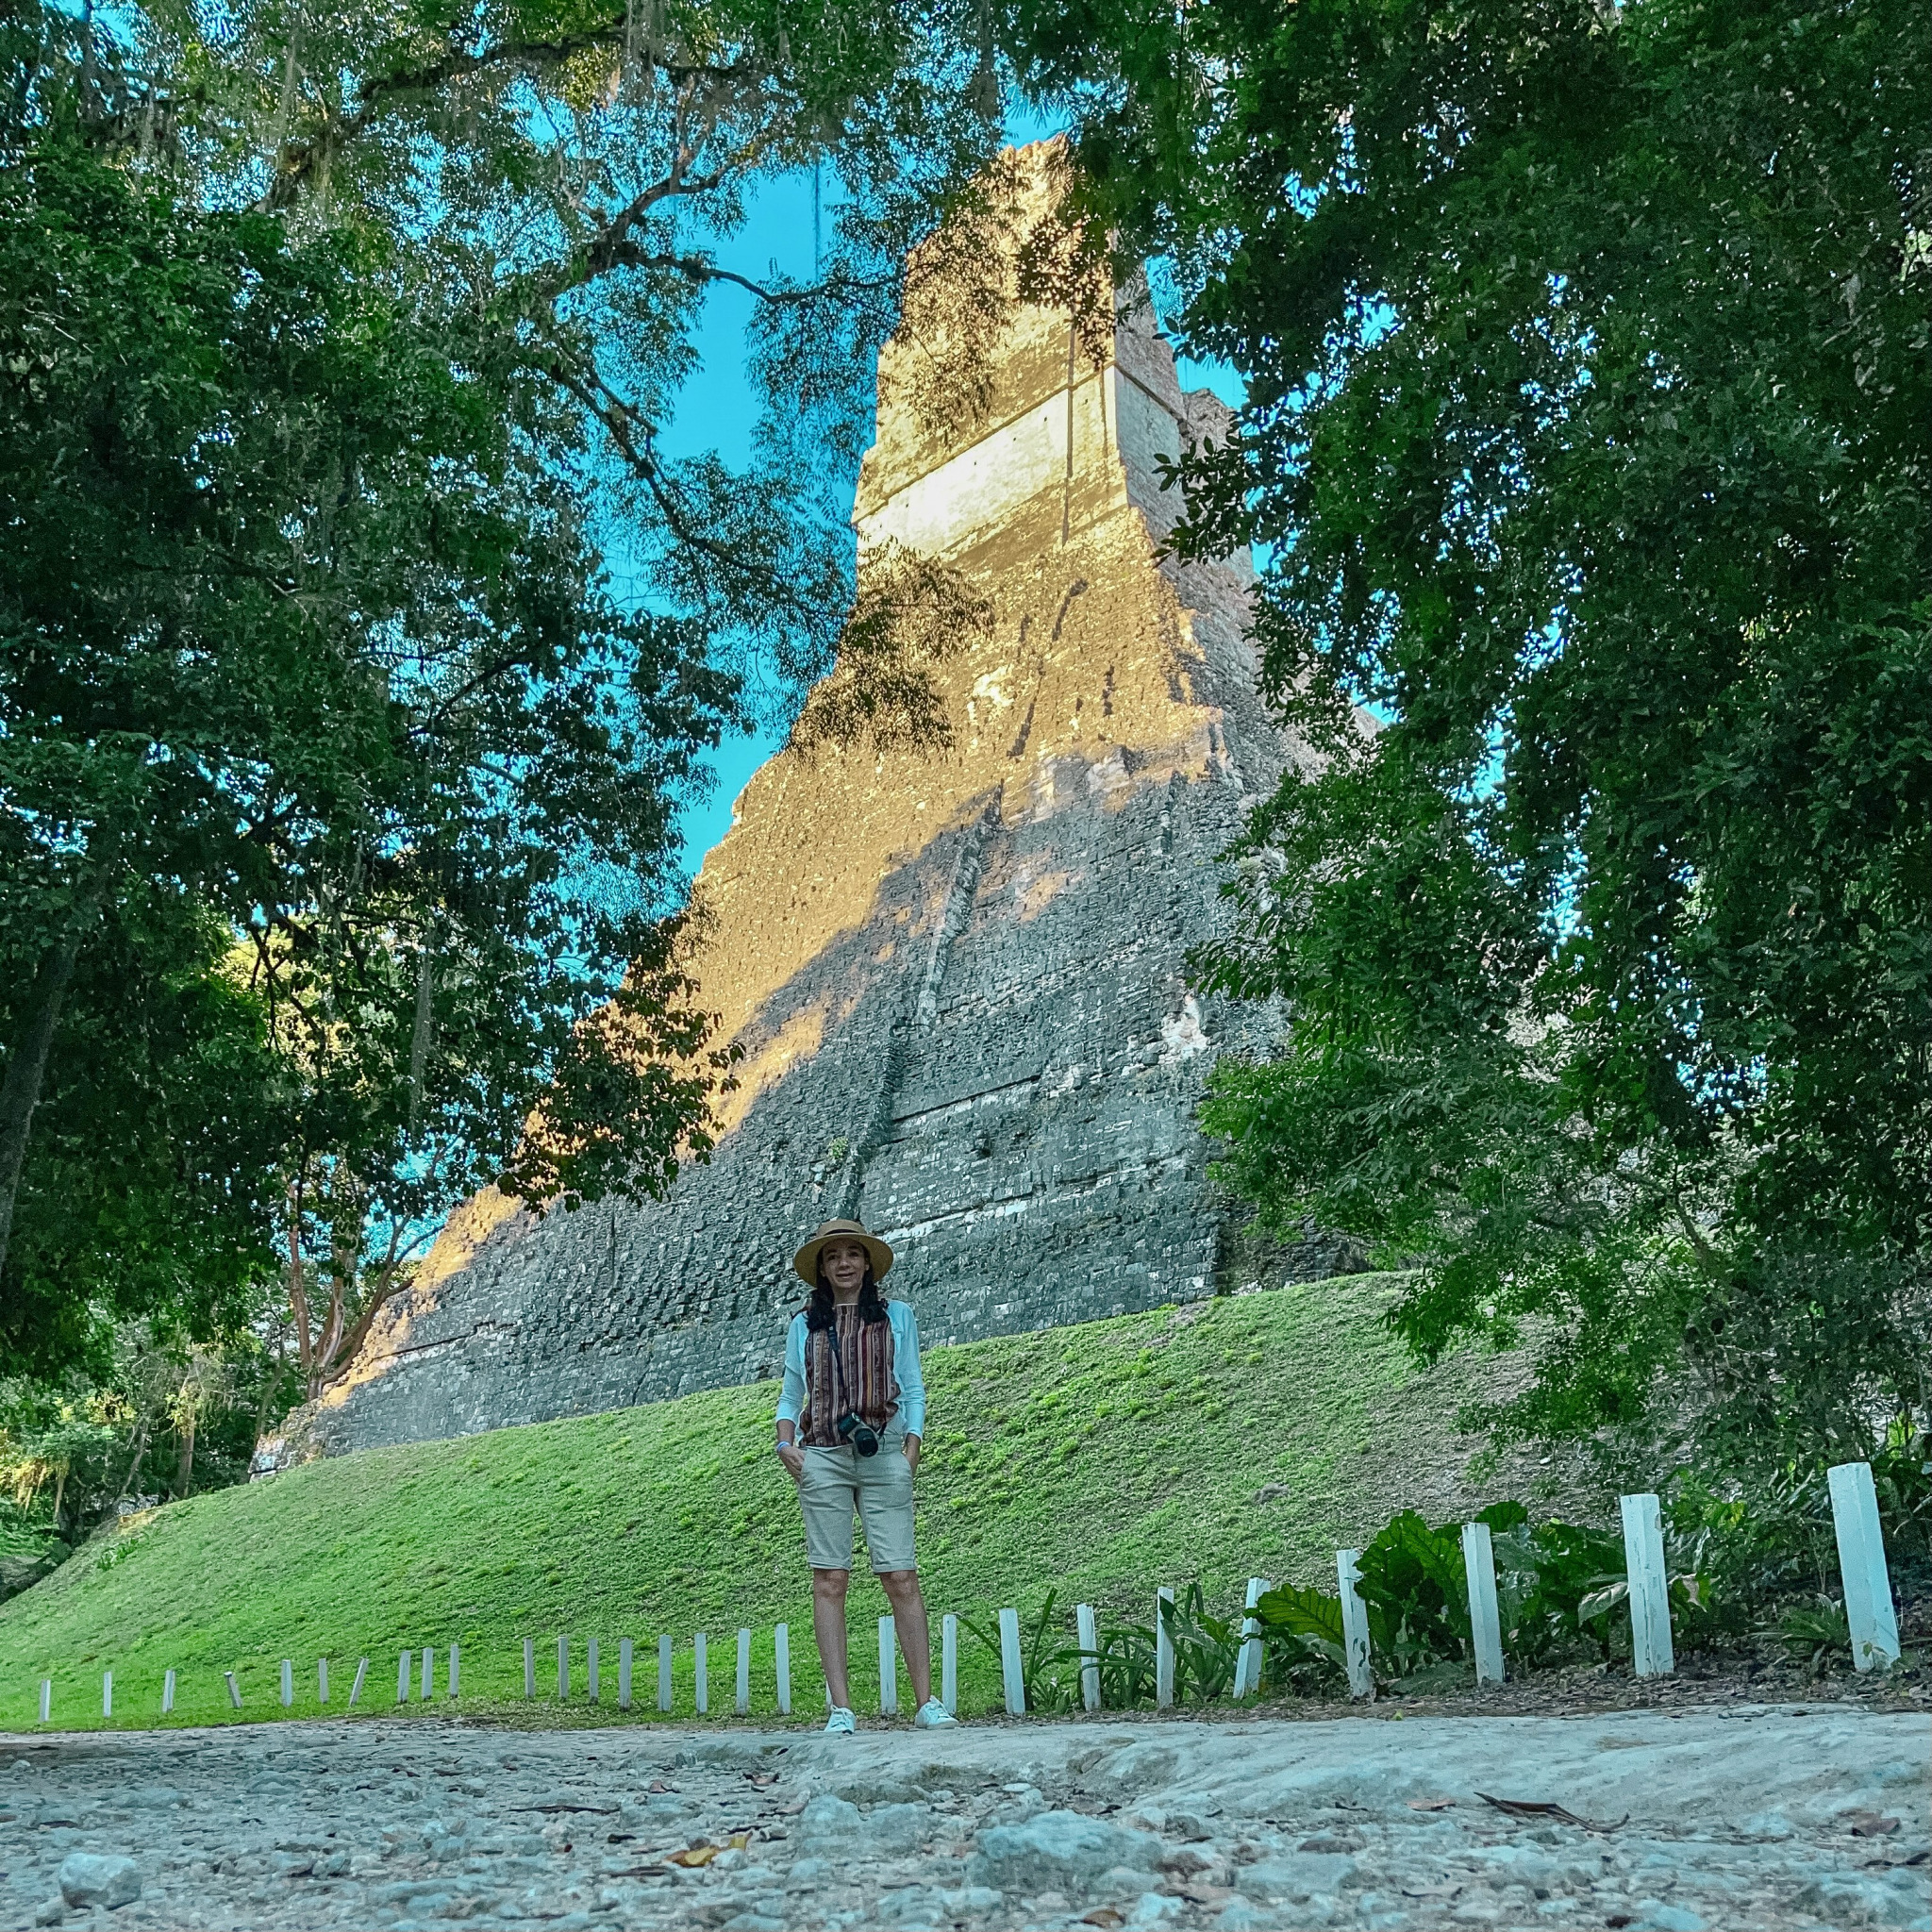 When is the best time of the year to visit Tikal